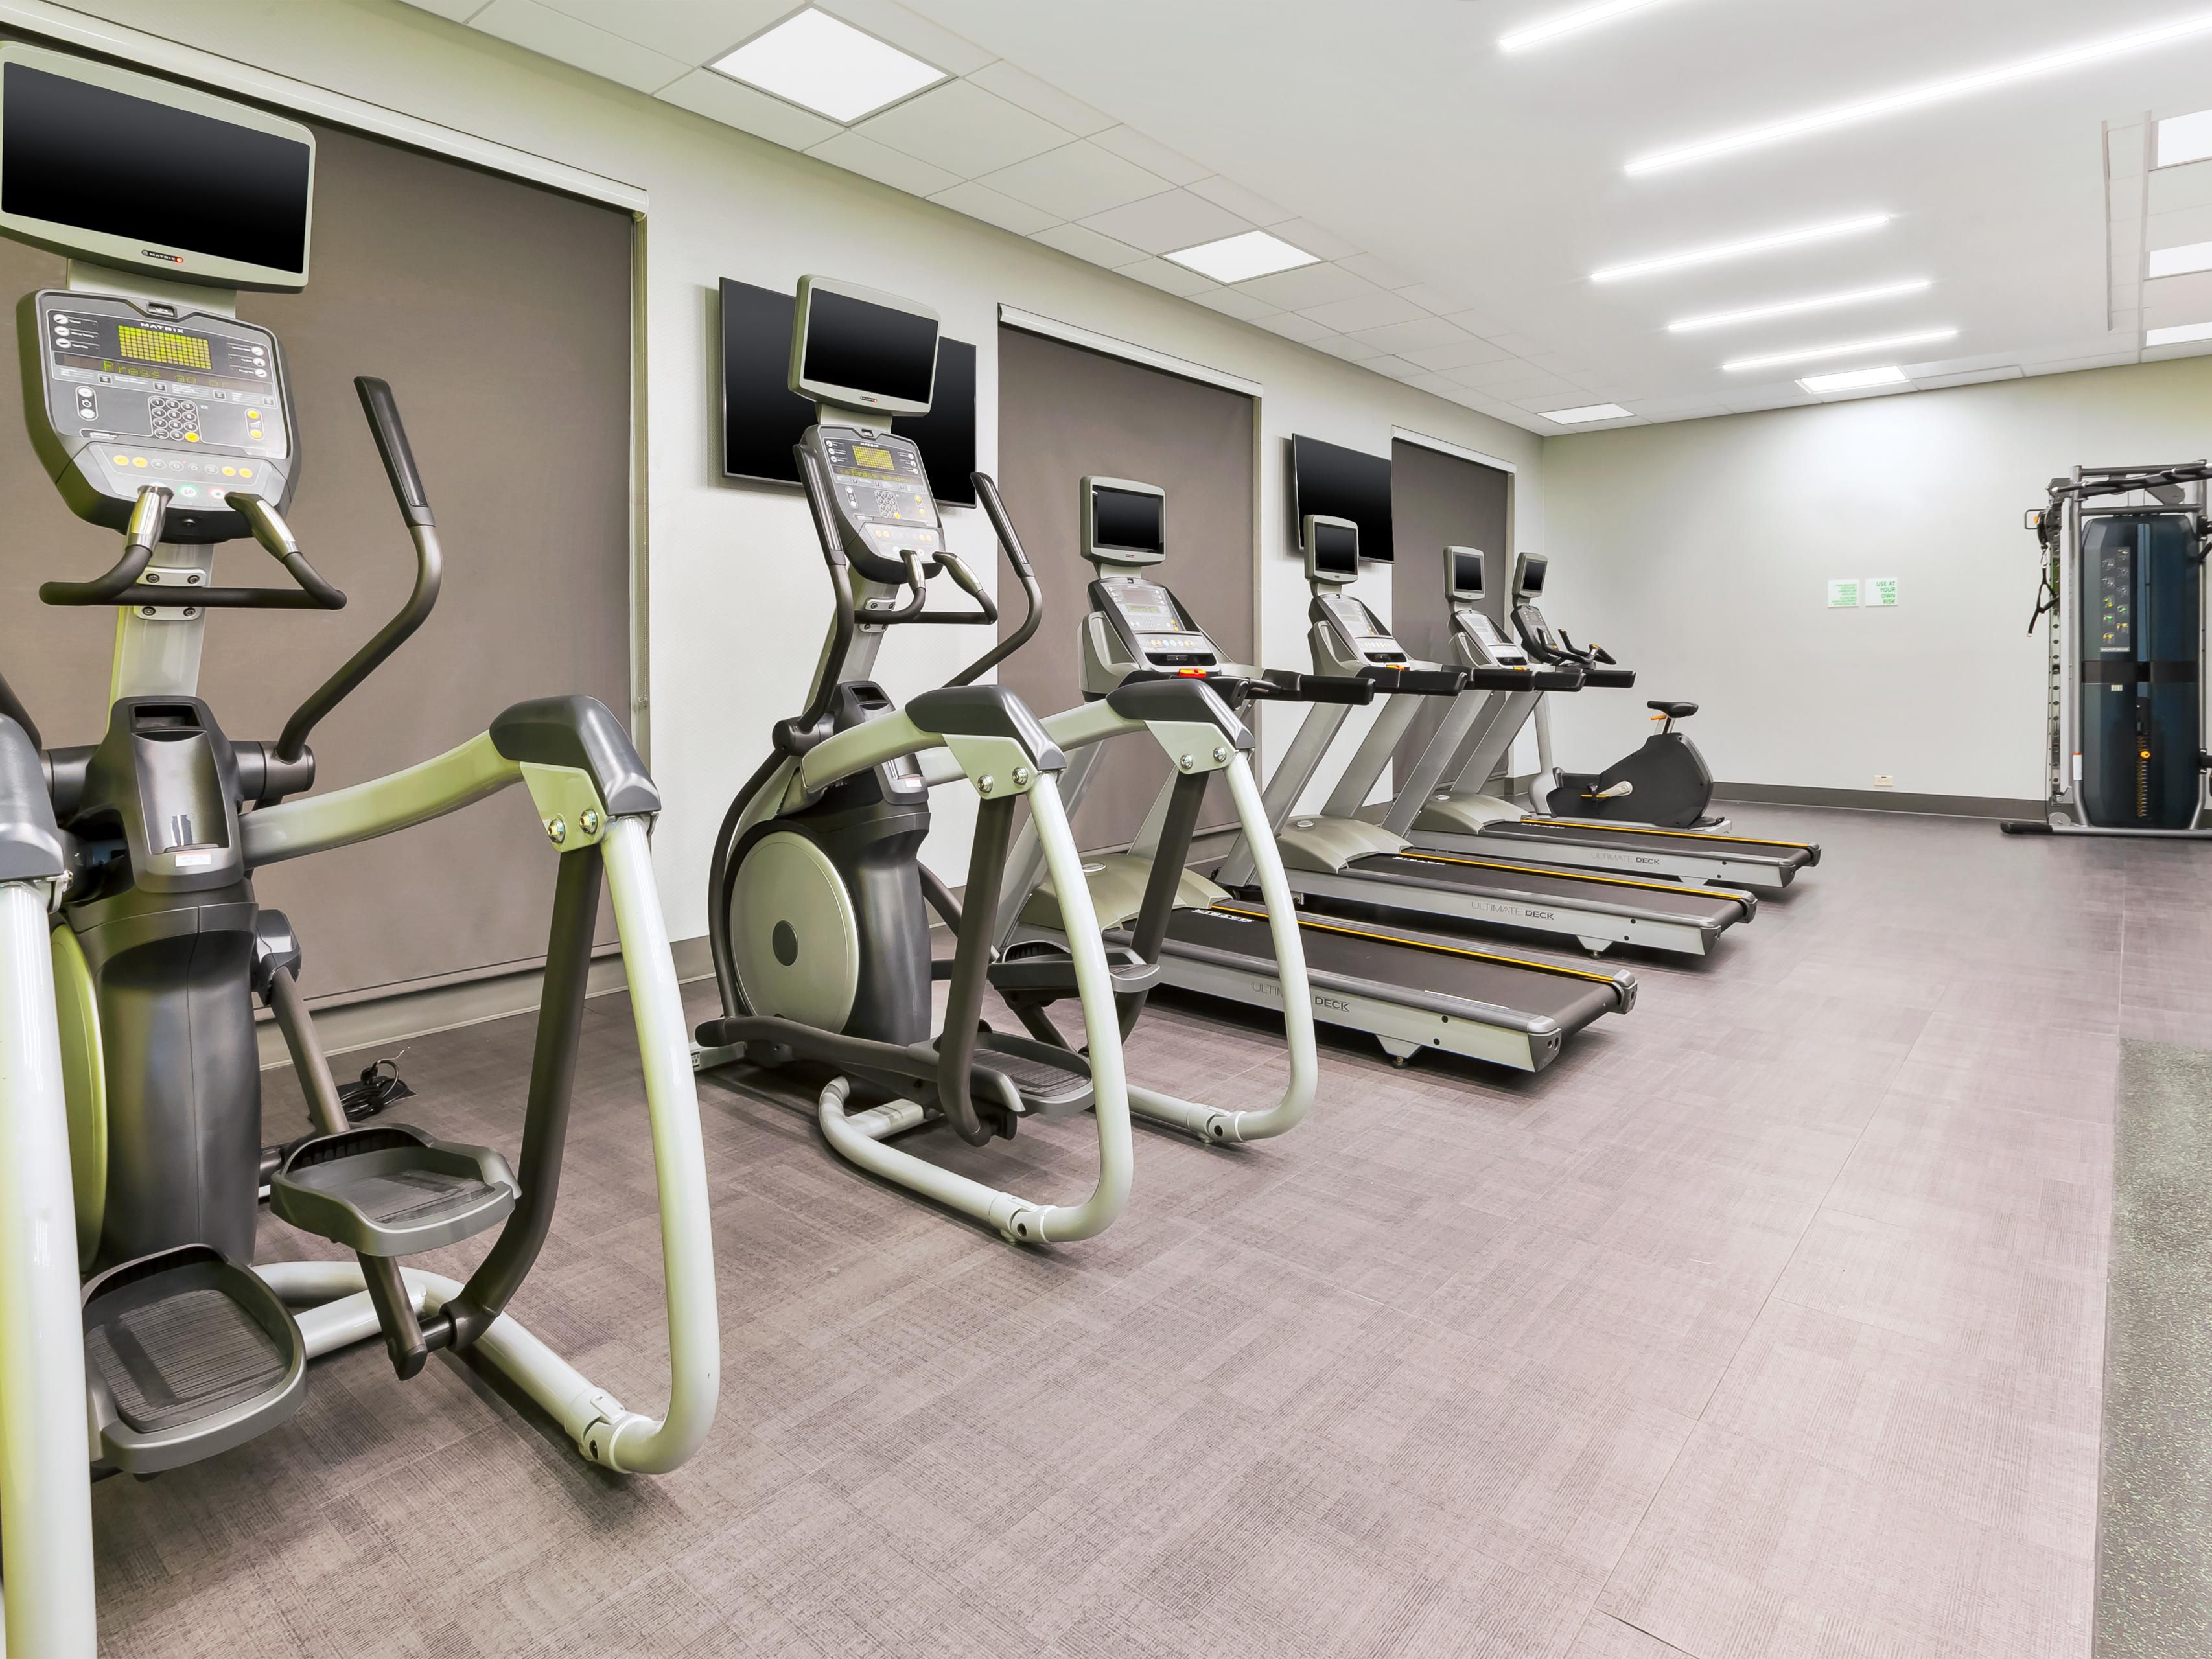 Every guest can enjoy our complimentary 24 hour fitness center while staying with us! Our fitness center features the newest equipment, built in screens, & complimentary ear buds upon request. 